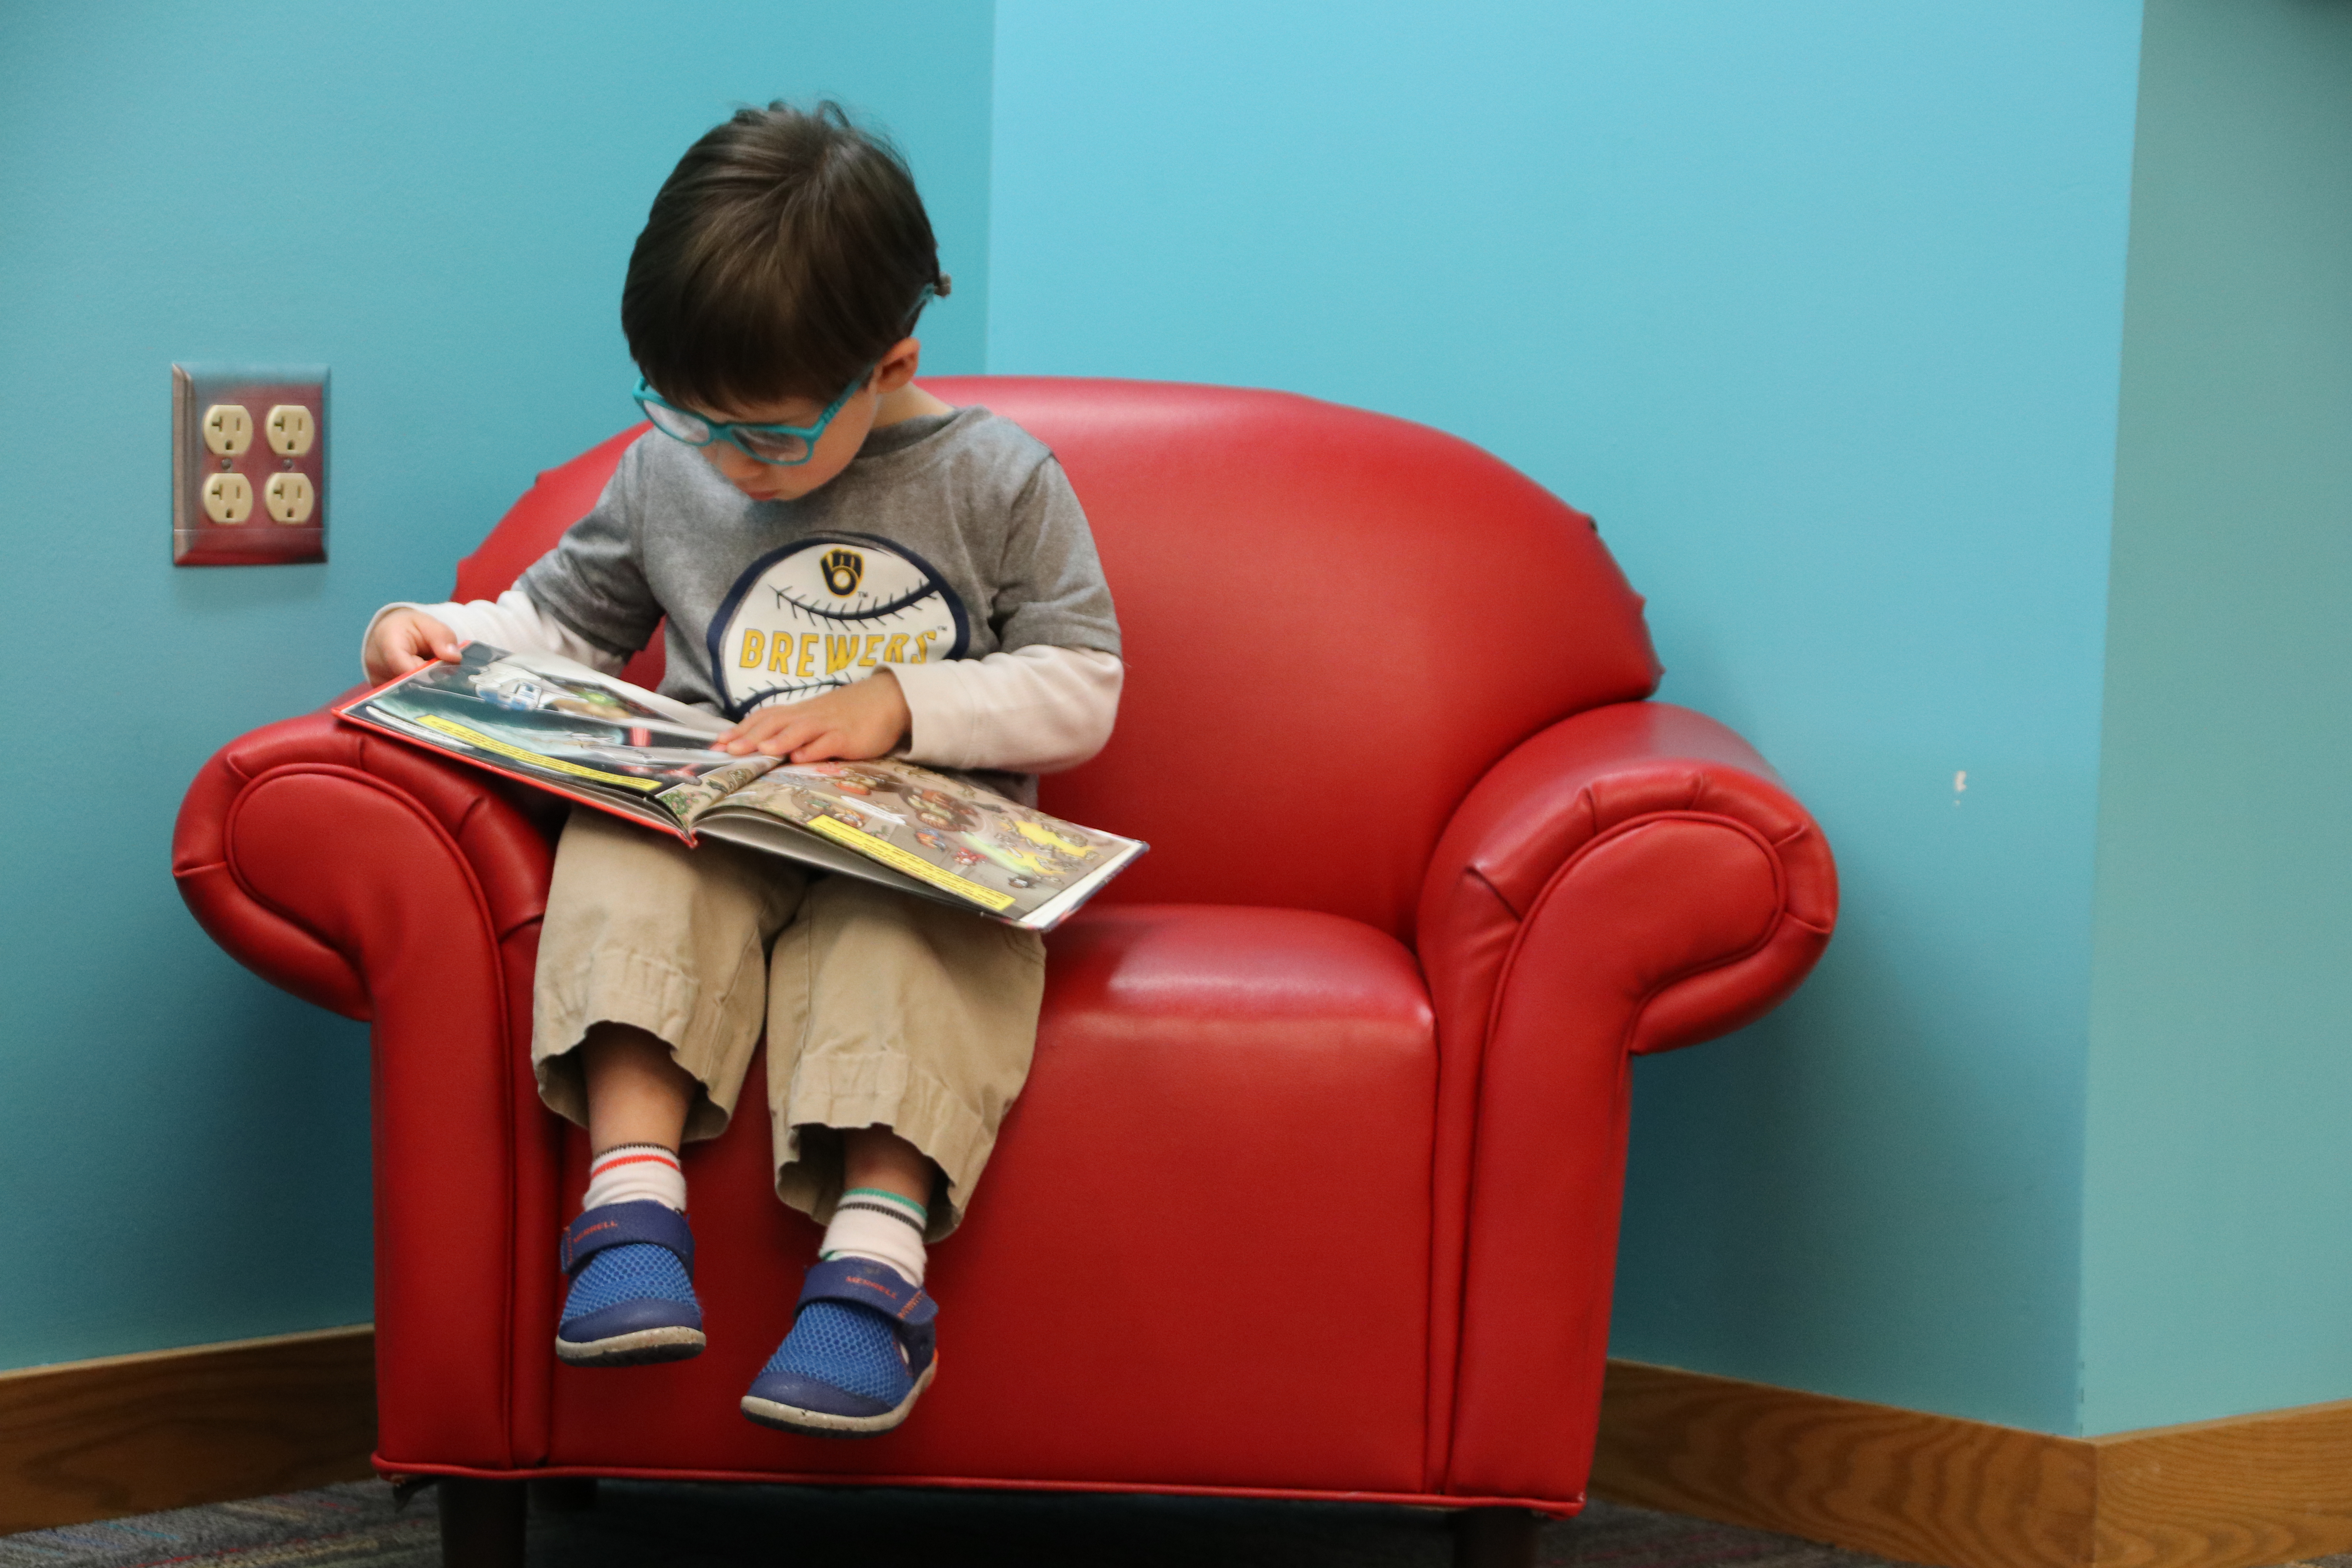 Child reading book in small red armchair